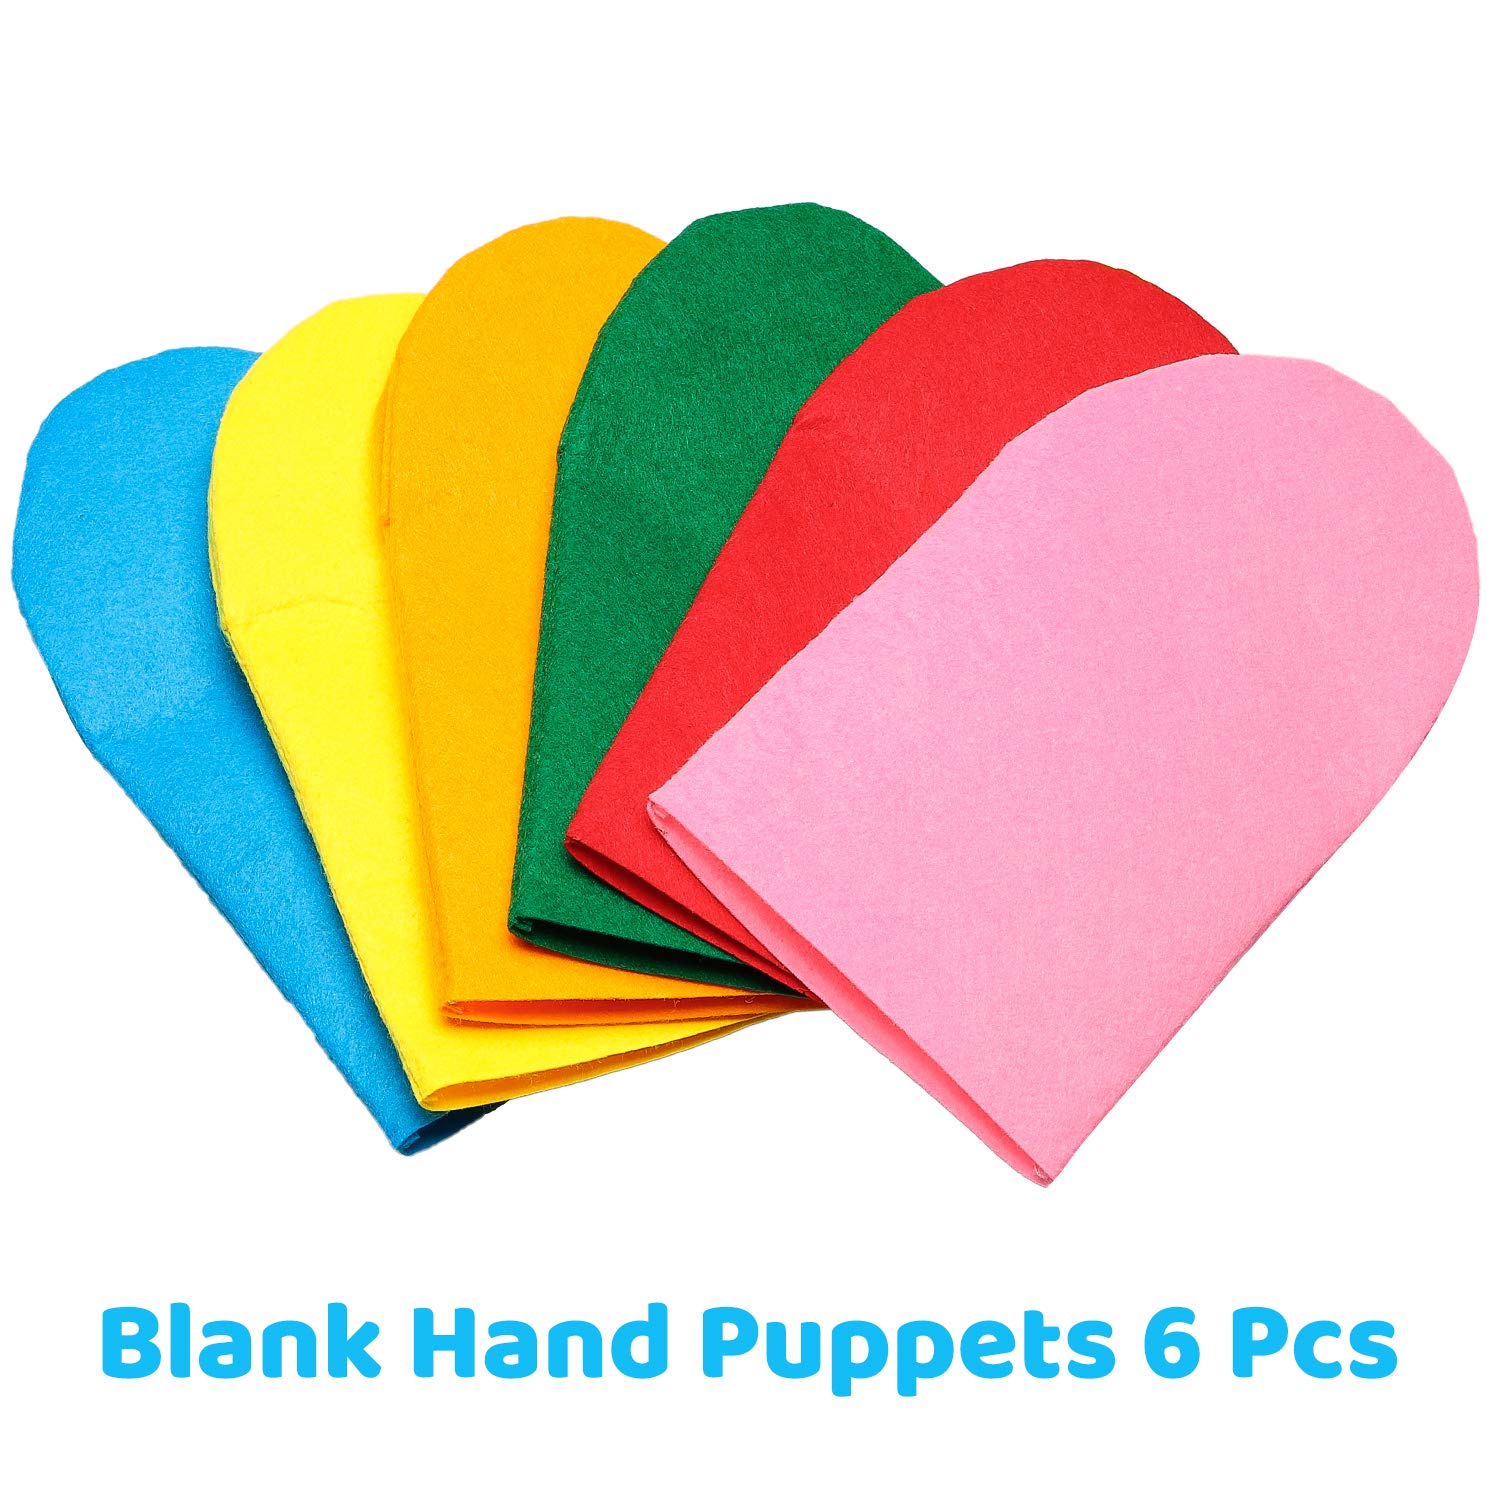 WATINC 6Pcs Hand Puppet Making Kit for Kids Art Craft Felt Sock Puppet Creative DIY Make Your Own Puppets Pompoms Wiggle Googly Eyes Storytelling Role Play Party Supplies for Girls Boys